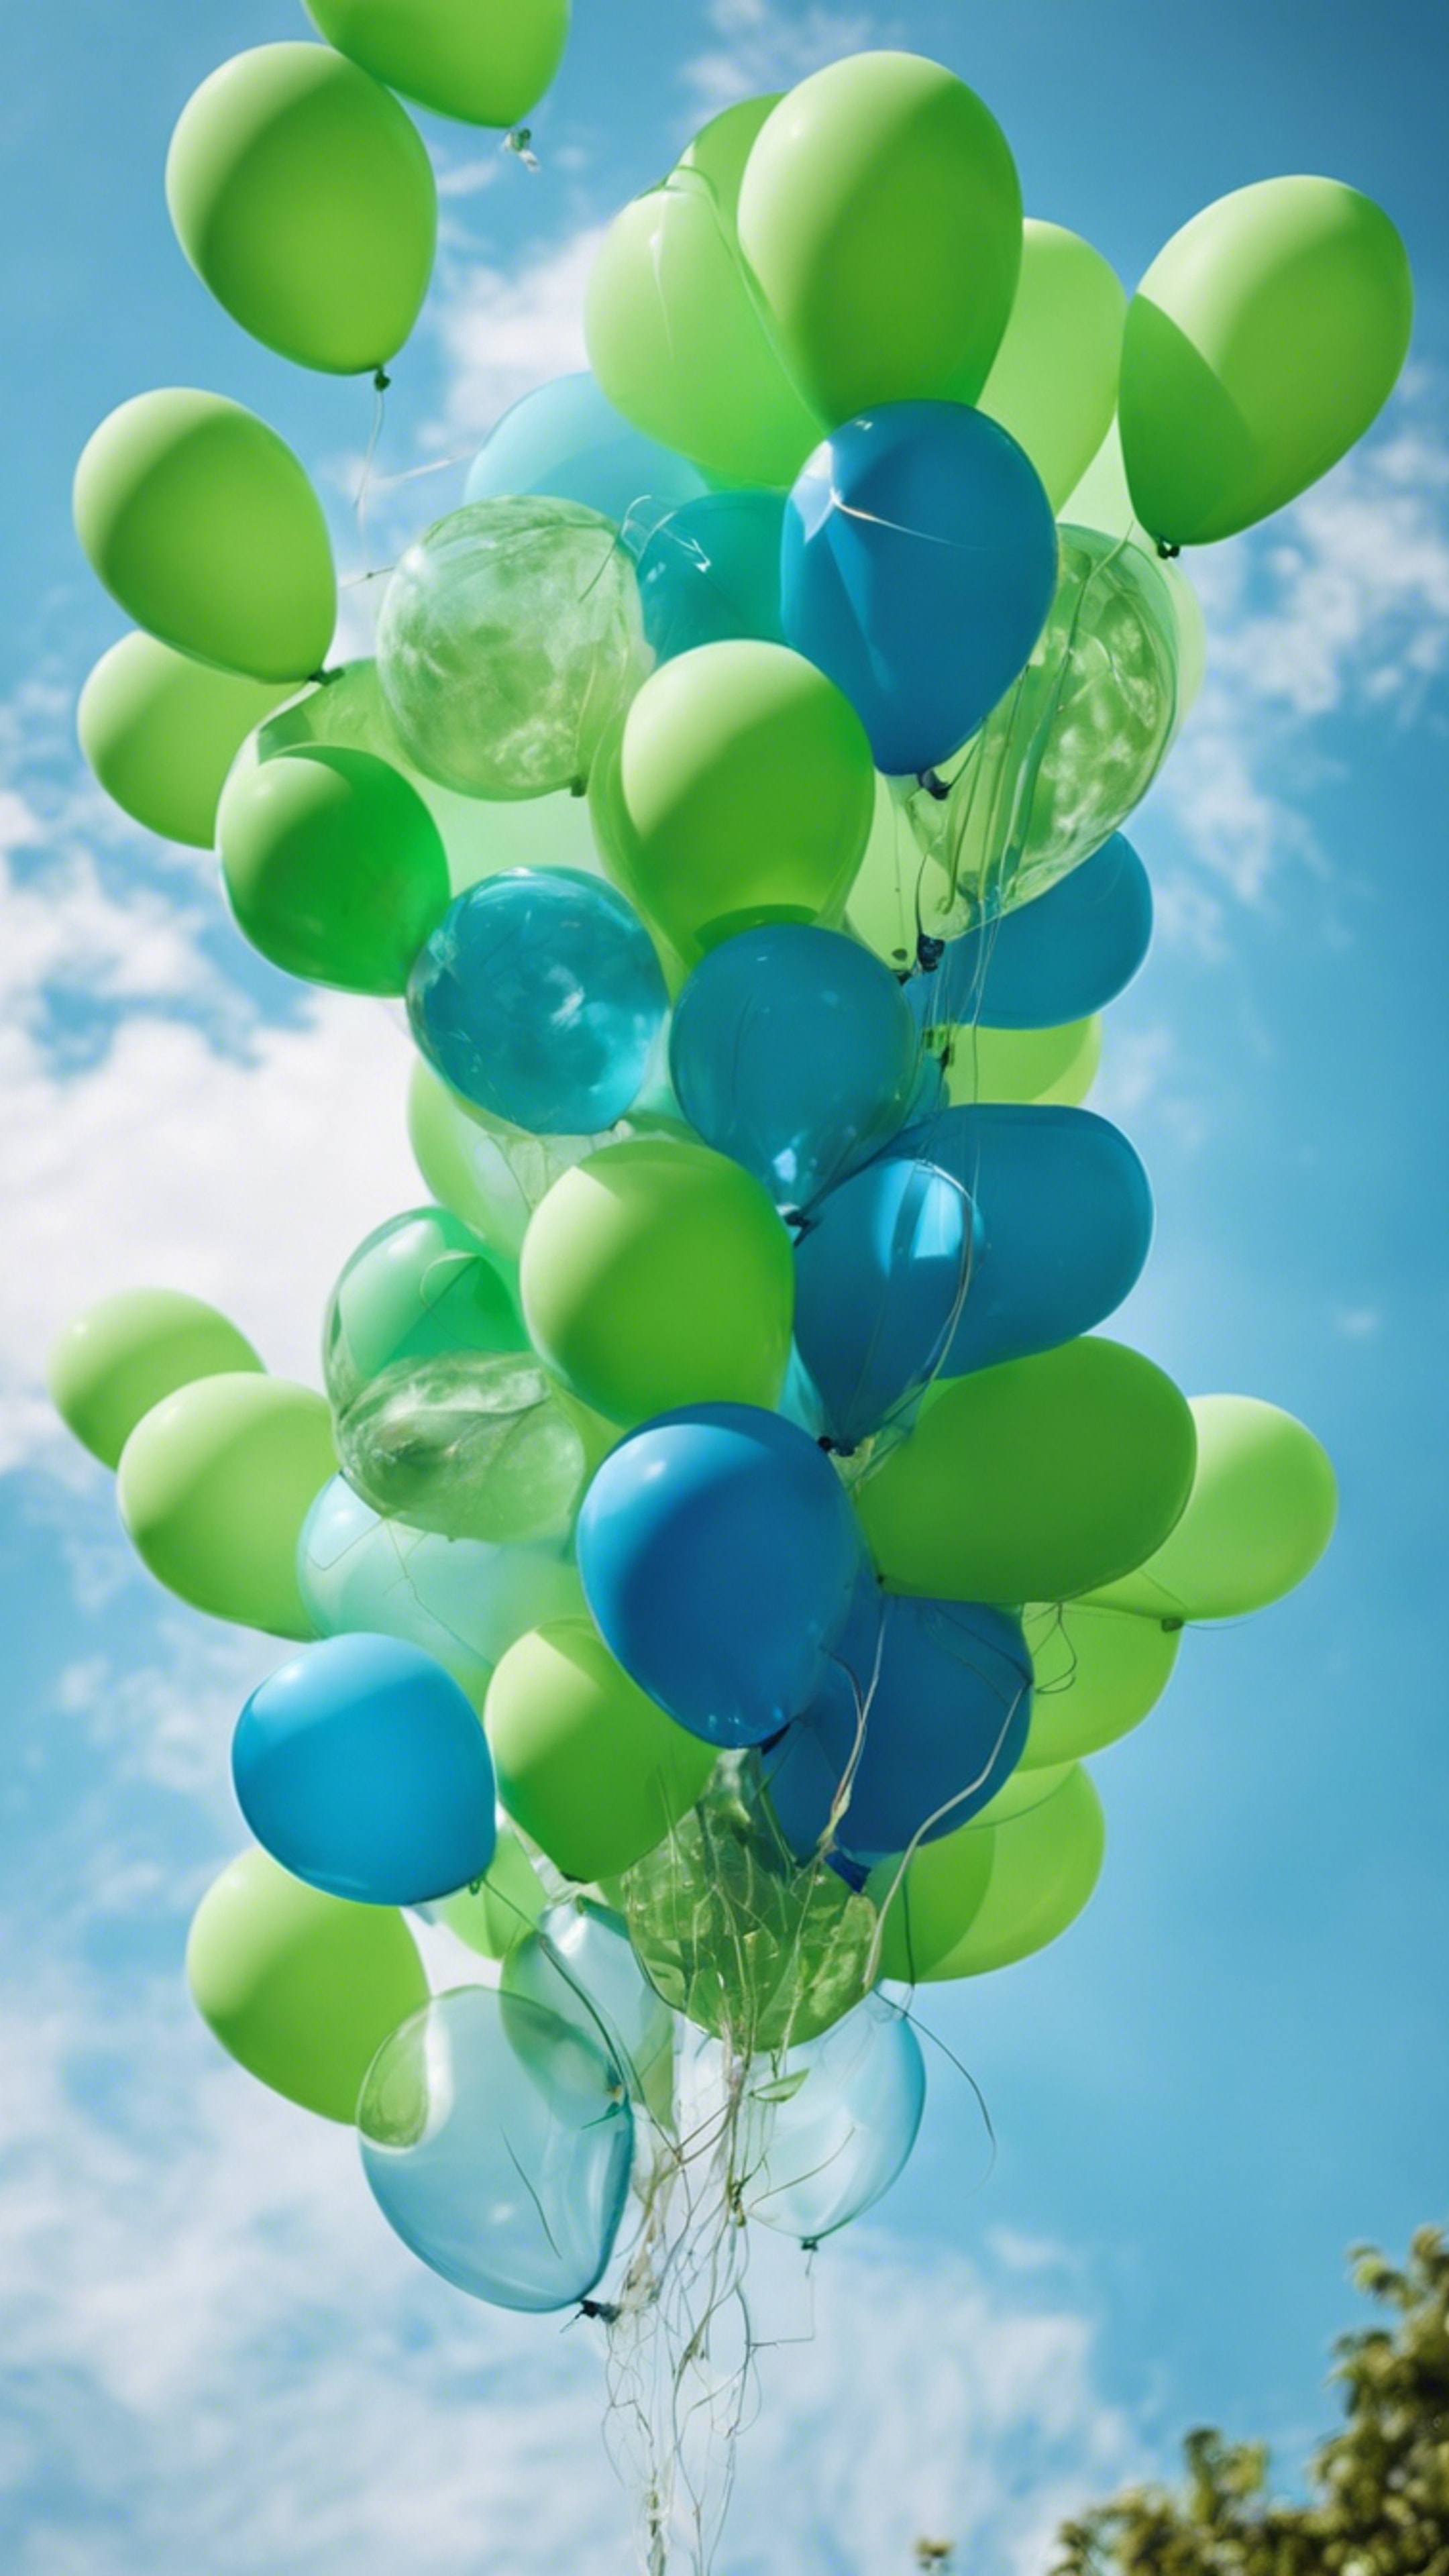 An array of blue and green balloons floating in a clear sky during the day. Wallpaper[0f6c85f120014fa1a128]